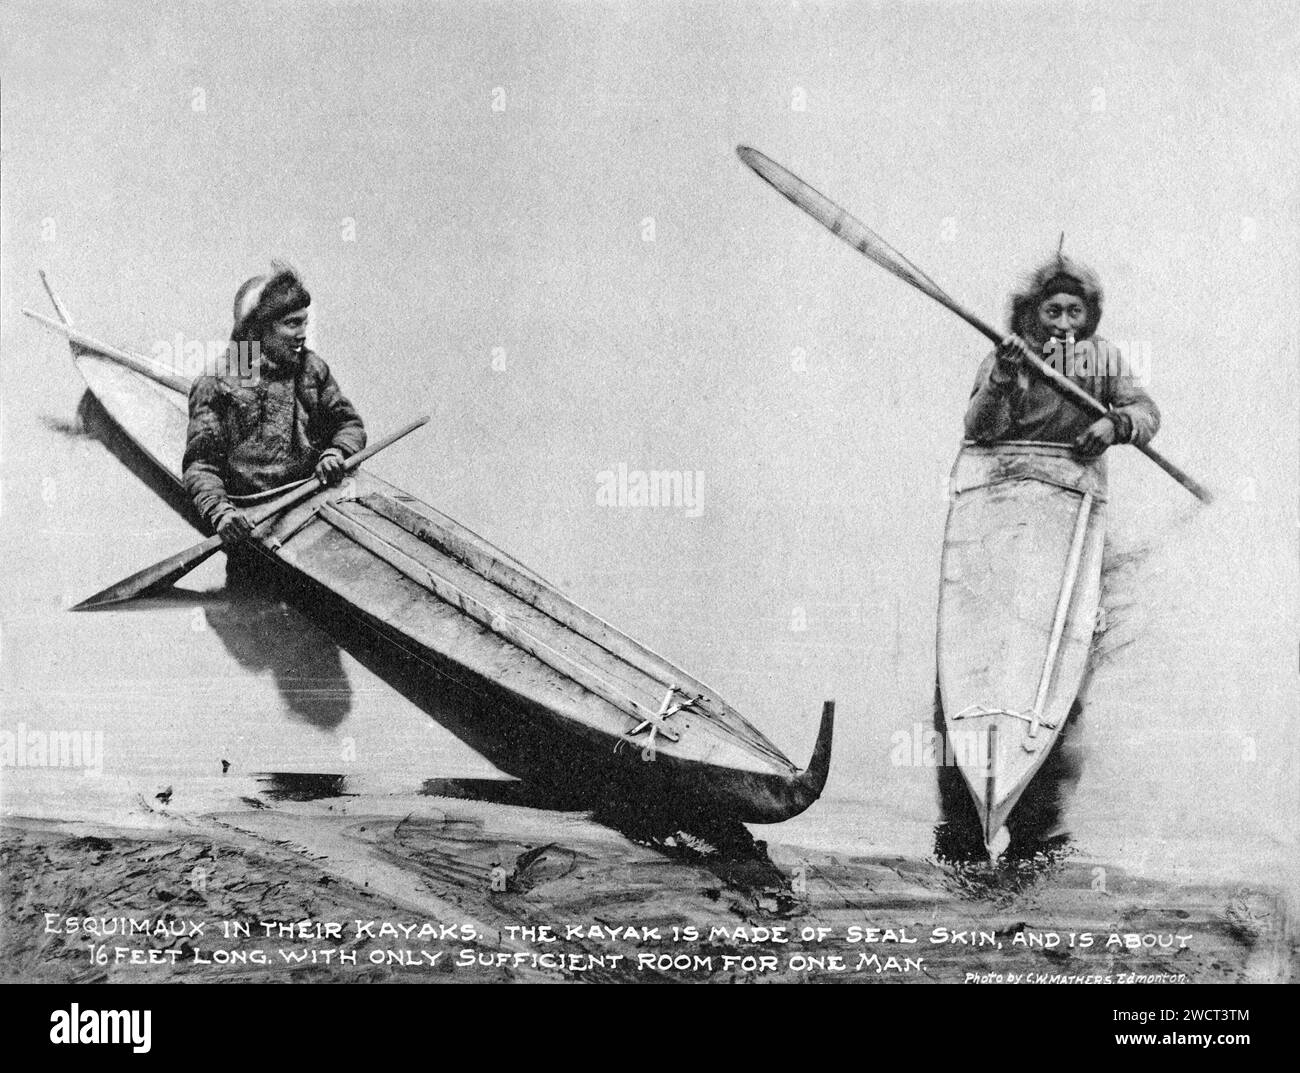 A 1901 photograph of an Inuit men in their kayaks taken by C W Mathers on an expedition to the far north of Canada and published in his book ‘The Far North’. Mathers captioned this photograph: Esquimaux [Inuit] in their kayaks. The kayak is made of seal skin, and is about 16 feet long, with only sufficient room for one man. Stock Photo